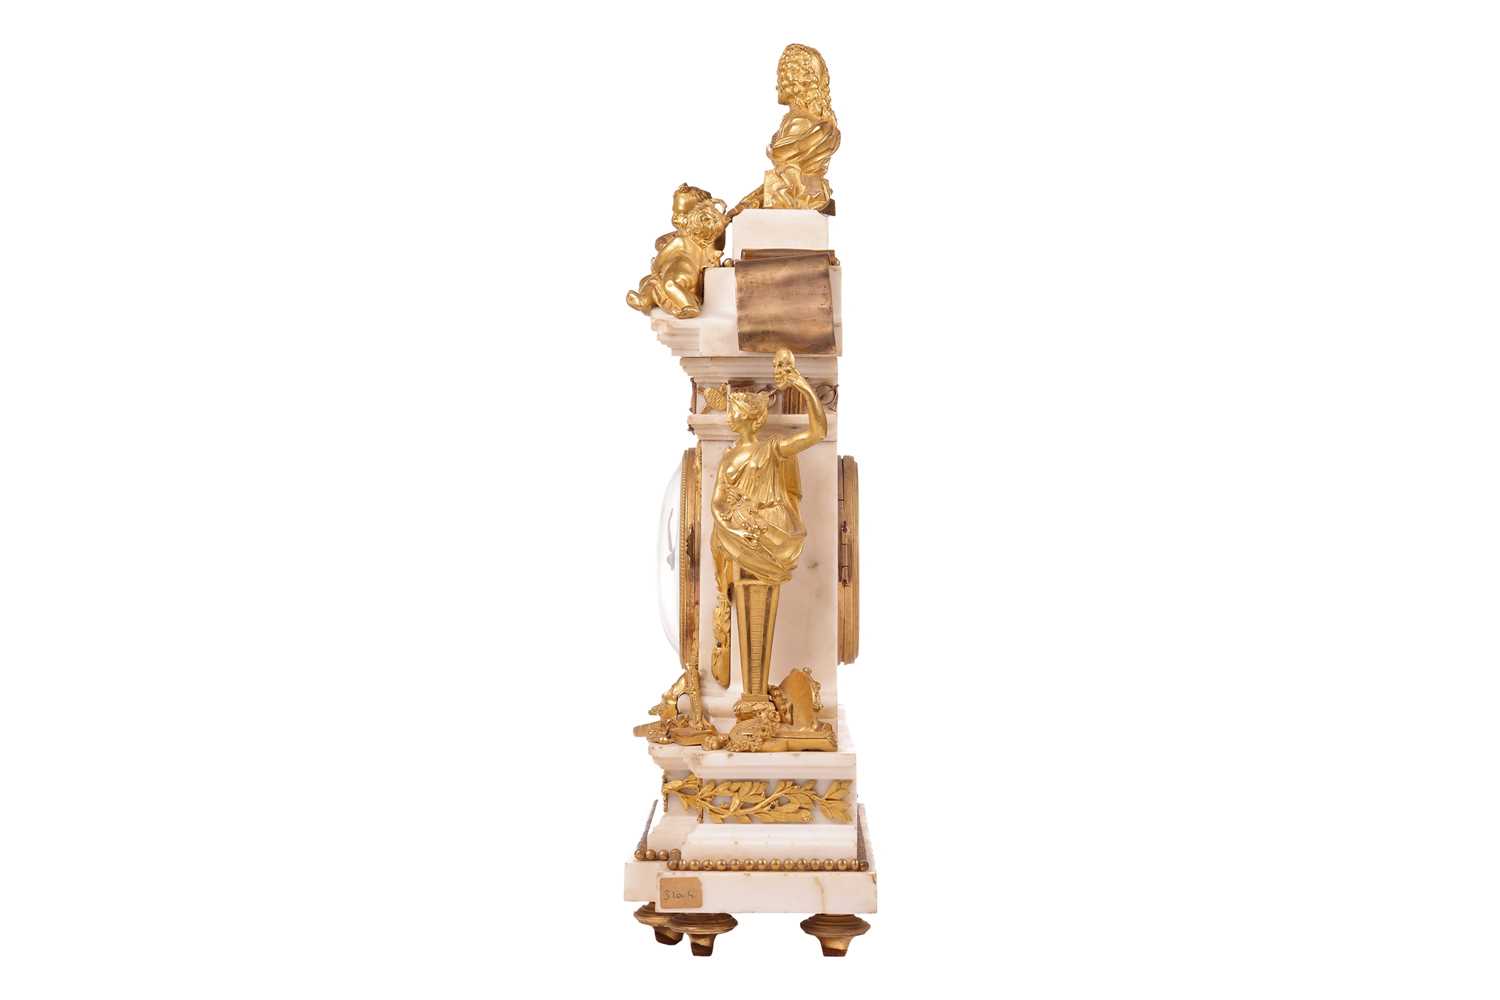 A large and ornate Louis XVI French marble and ormolu-mounted figural mantle clock, of architectural - Image 8 of 23